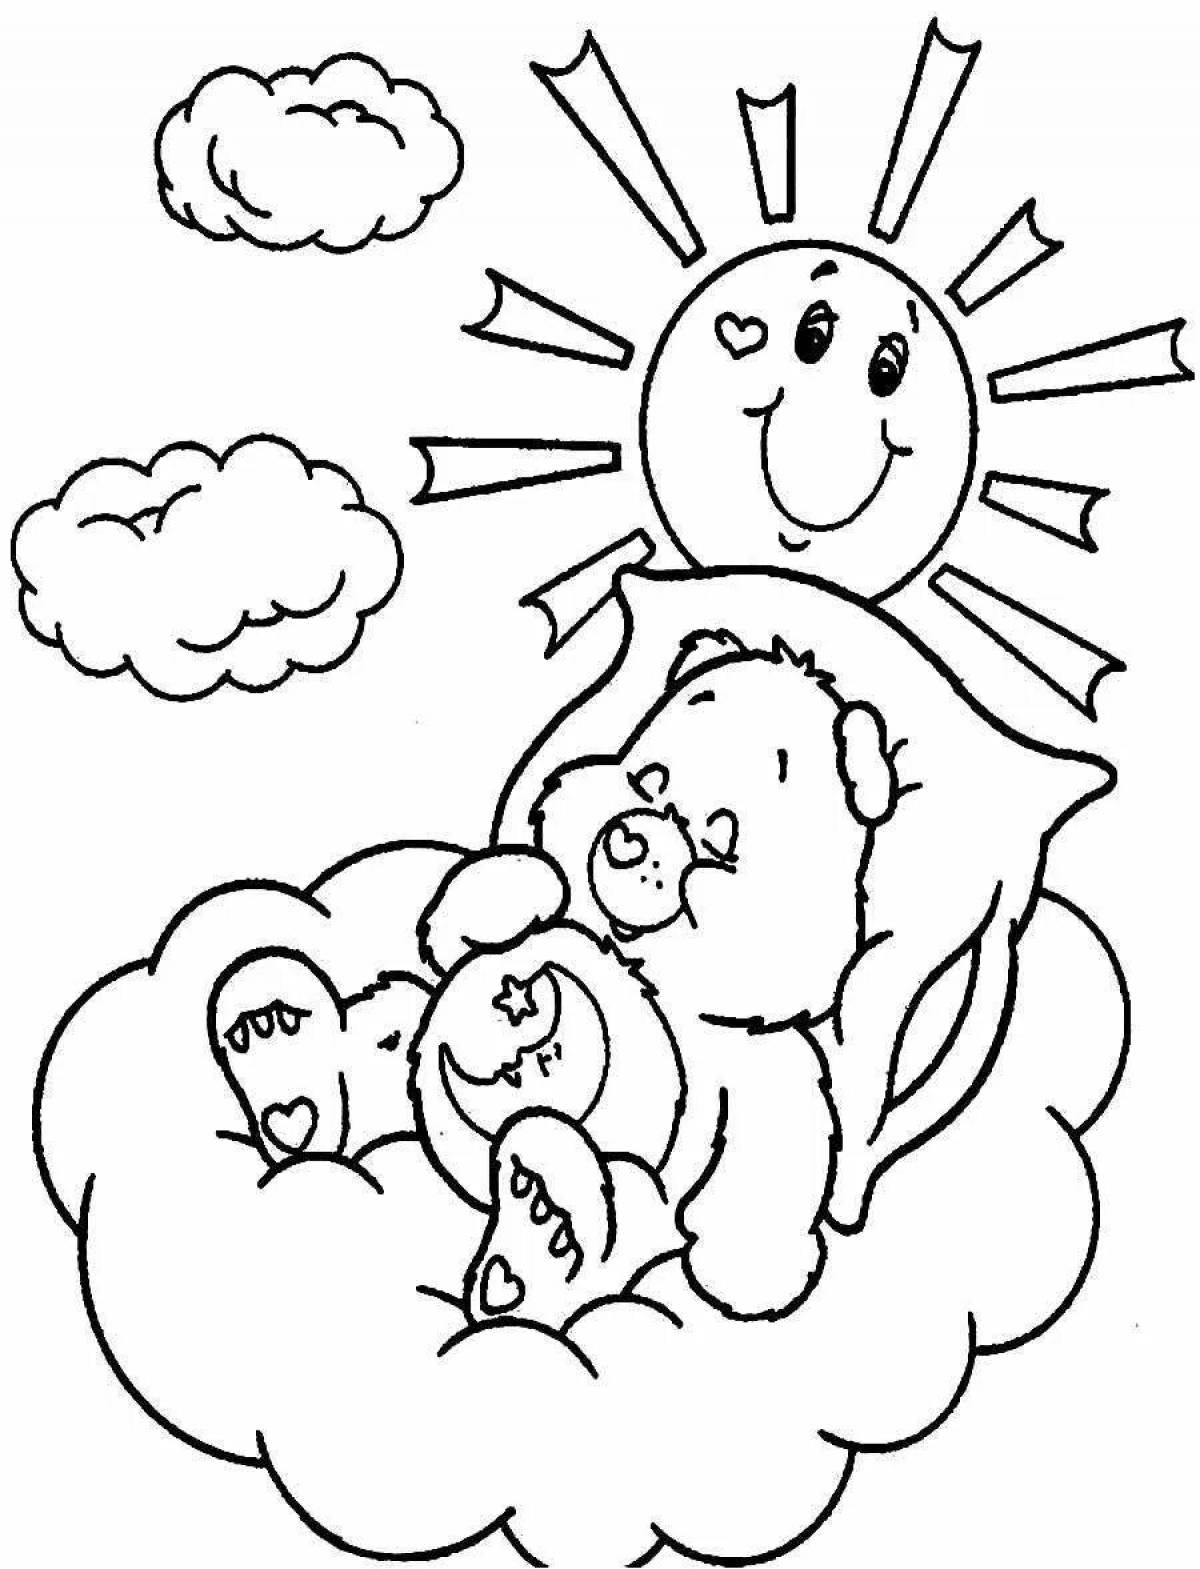 Magic morning coloring page for kids